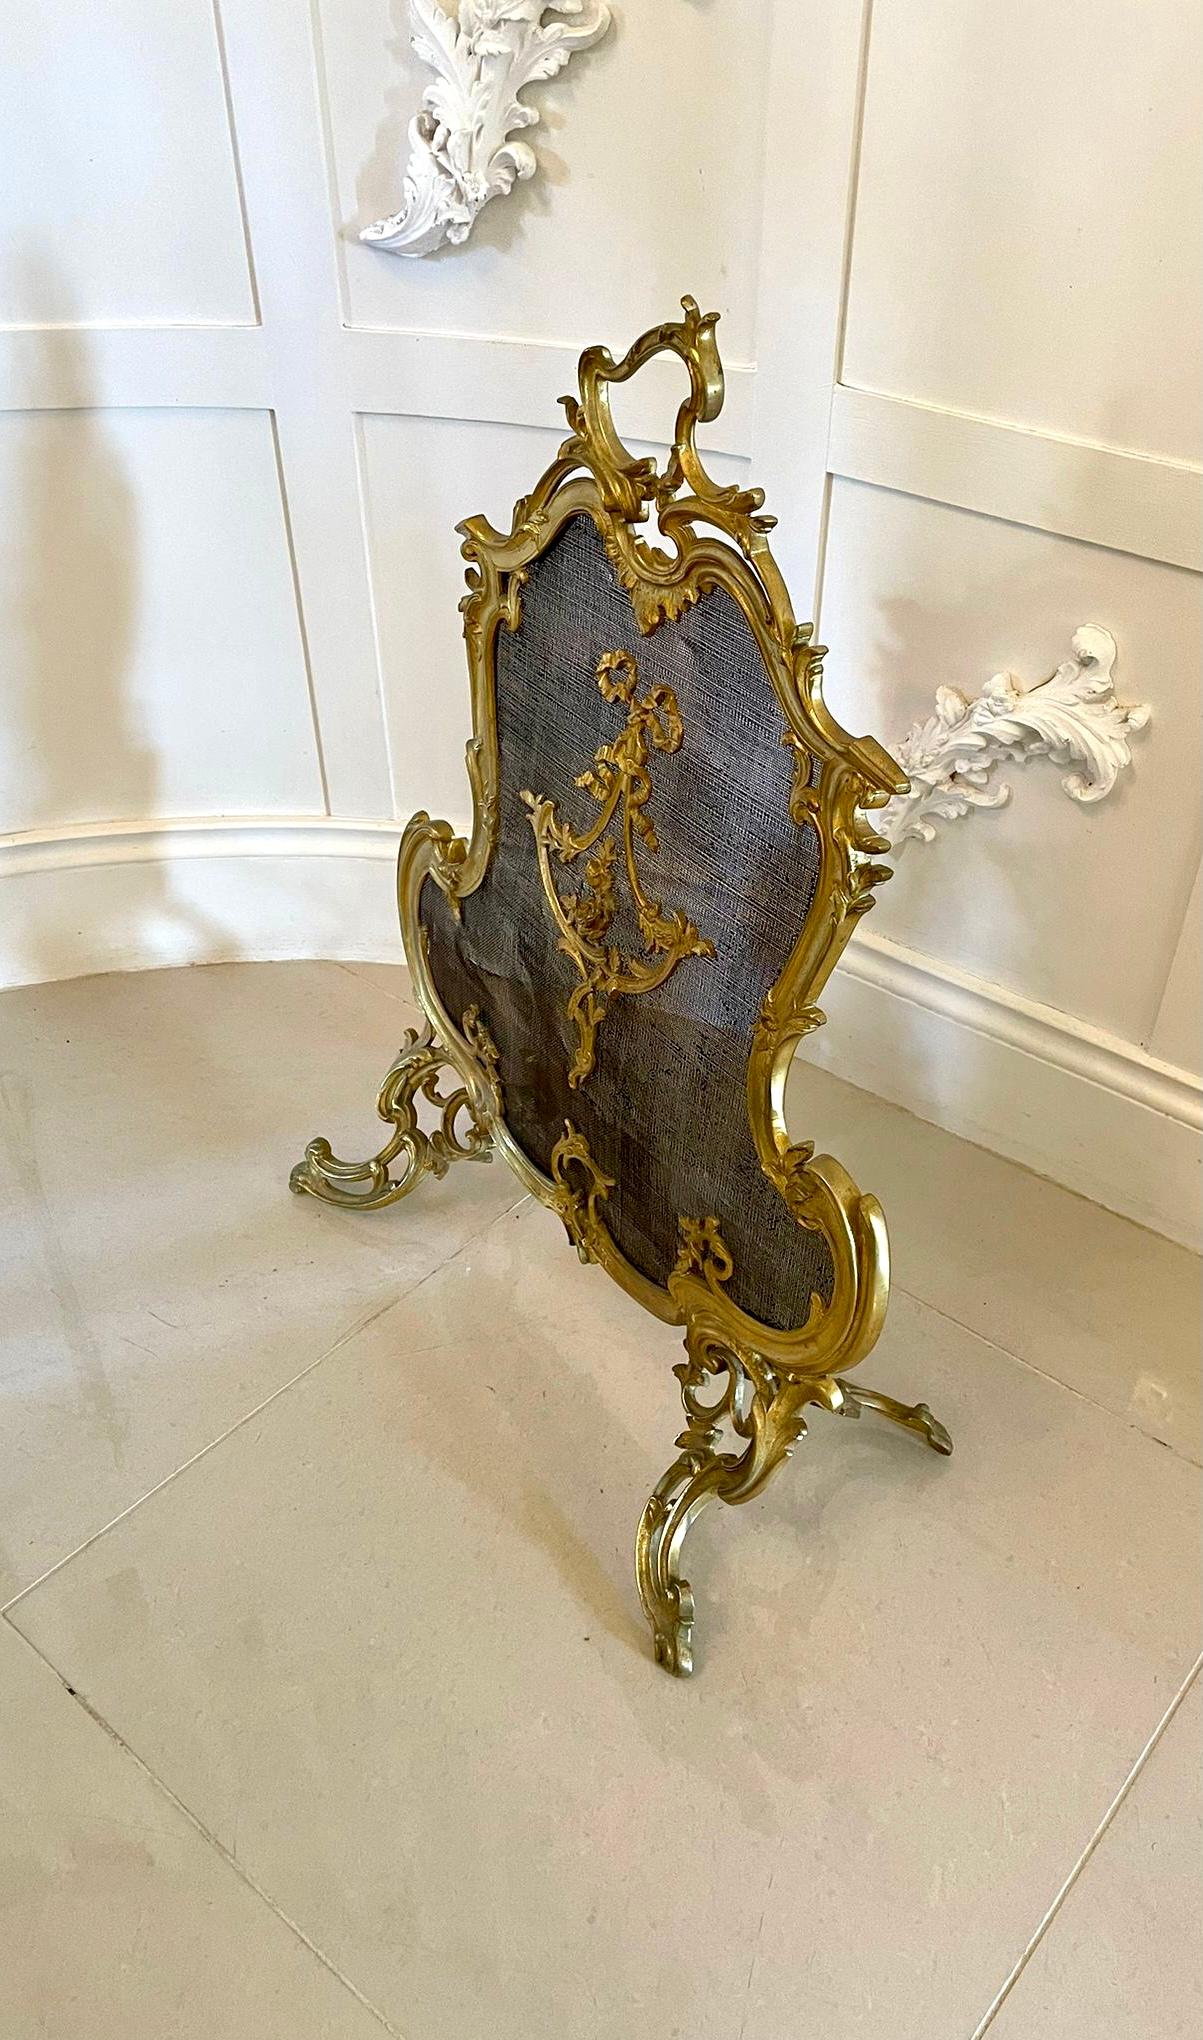 Outstanding Quality French 19th Century Ornate Gilt Ormolu Fire Screen 1